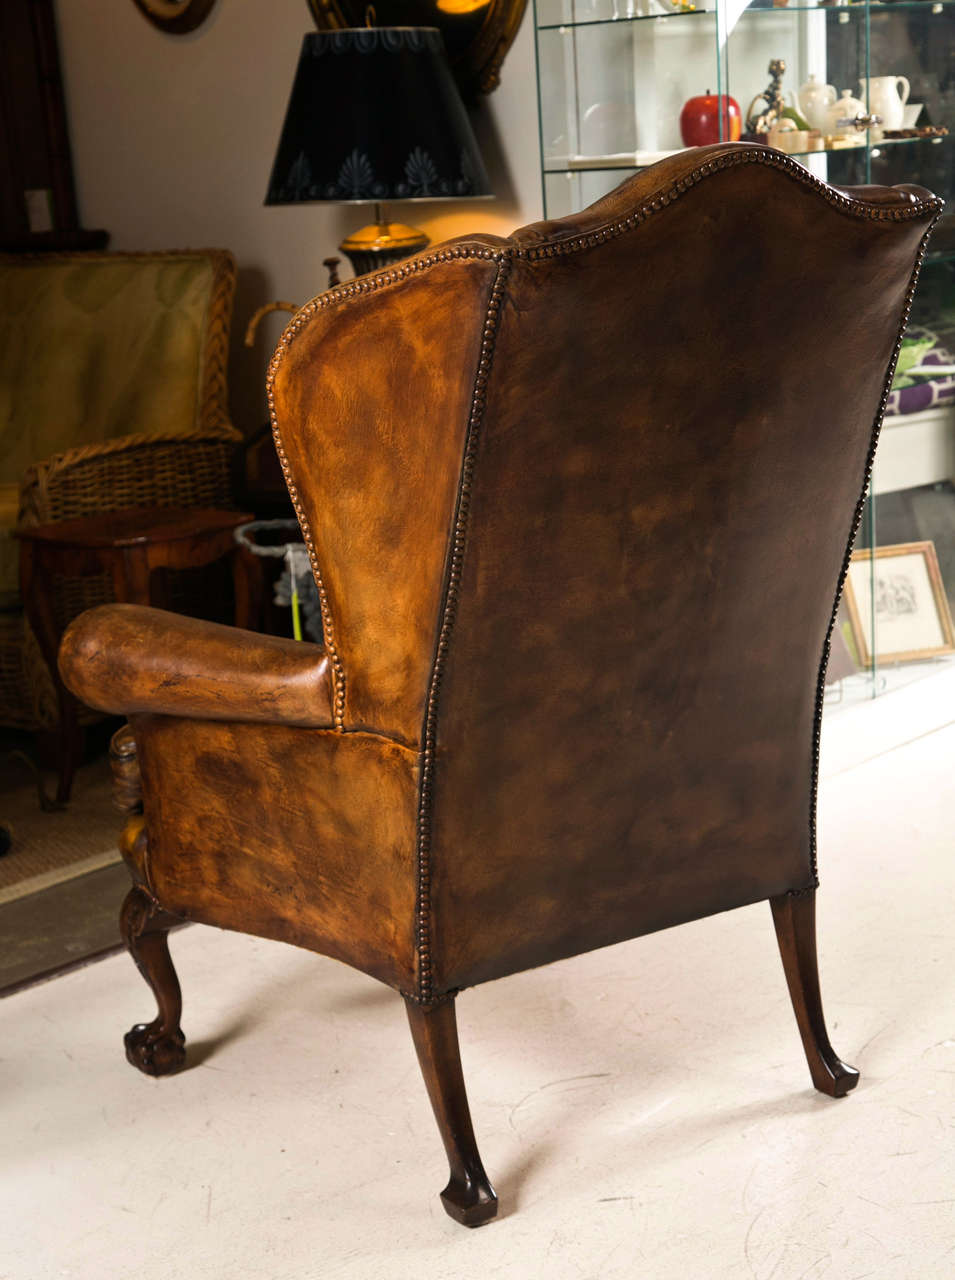 20th Century Late 19th C Leather Wingback Chair with Ball and Claw Feet